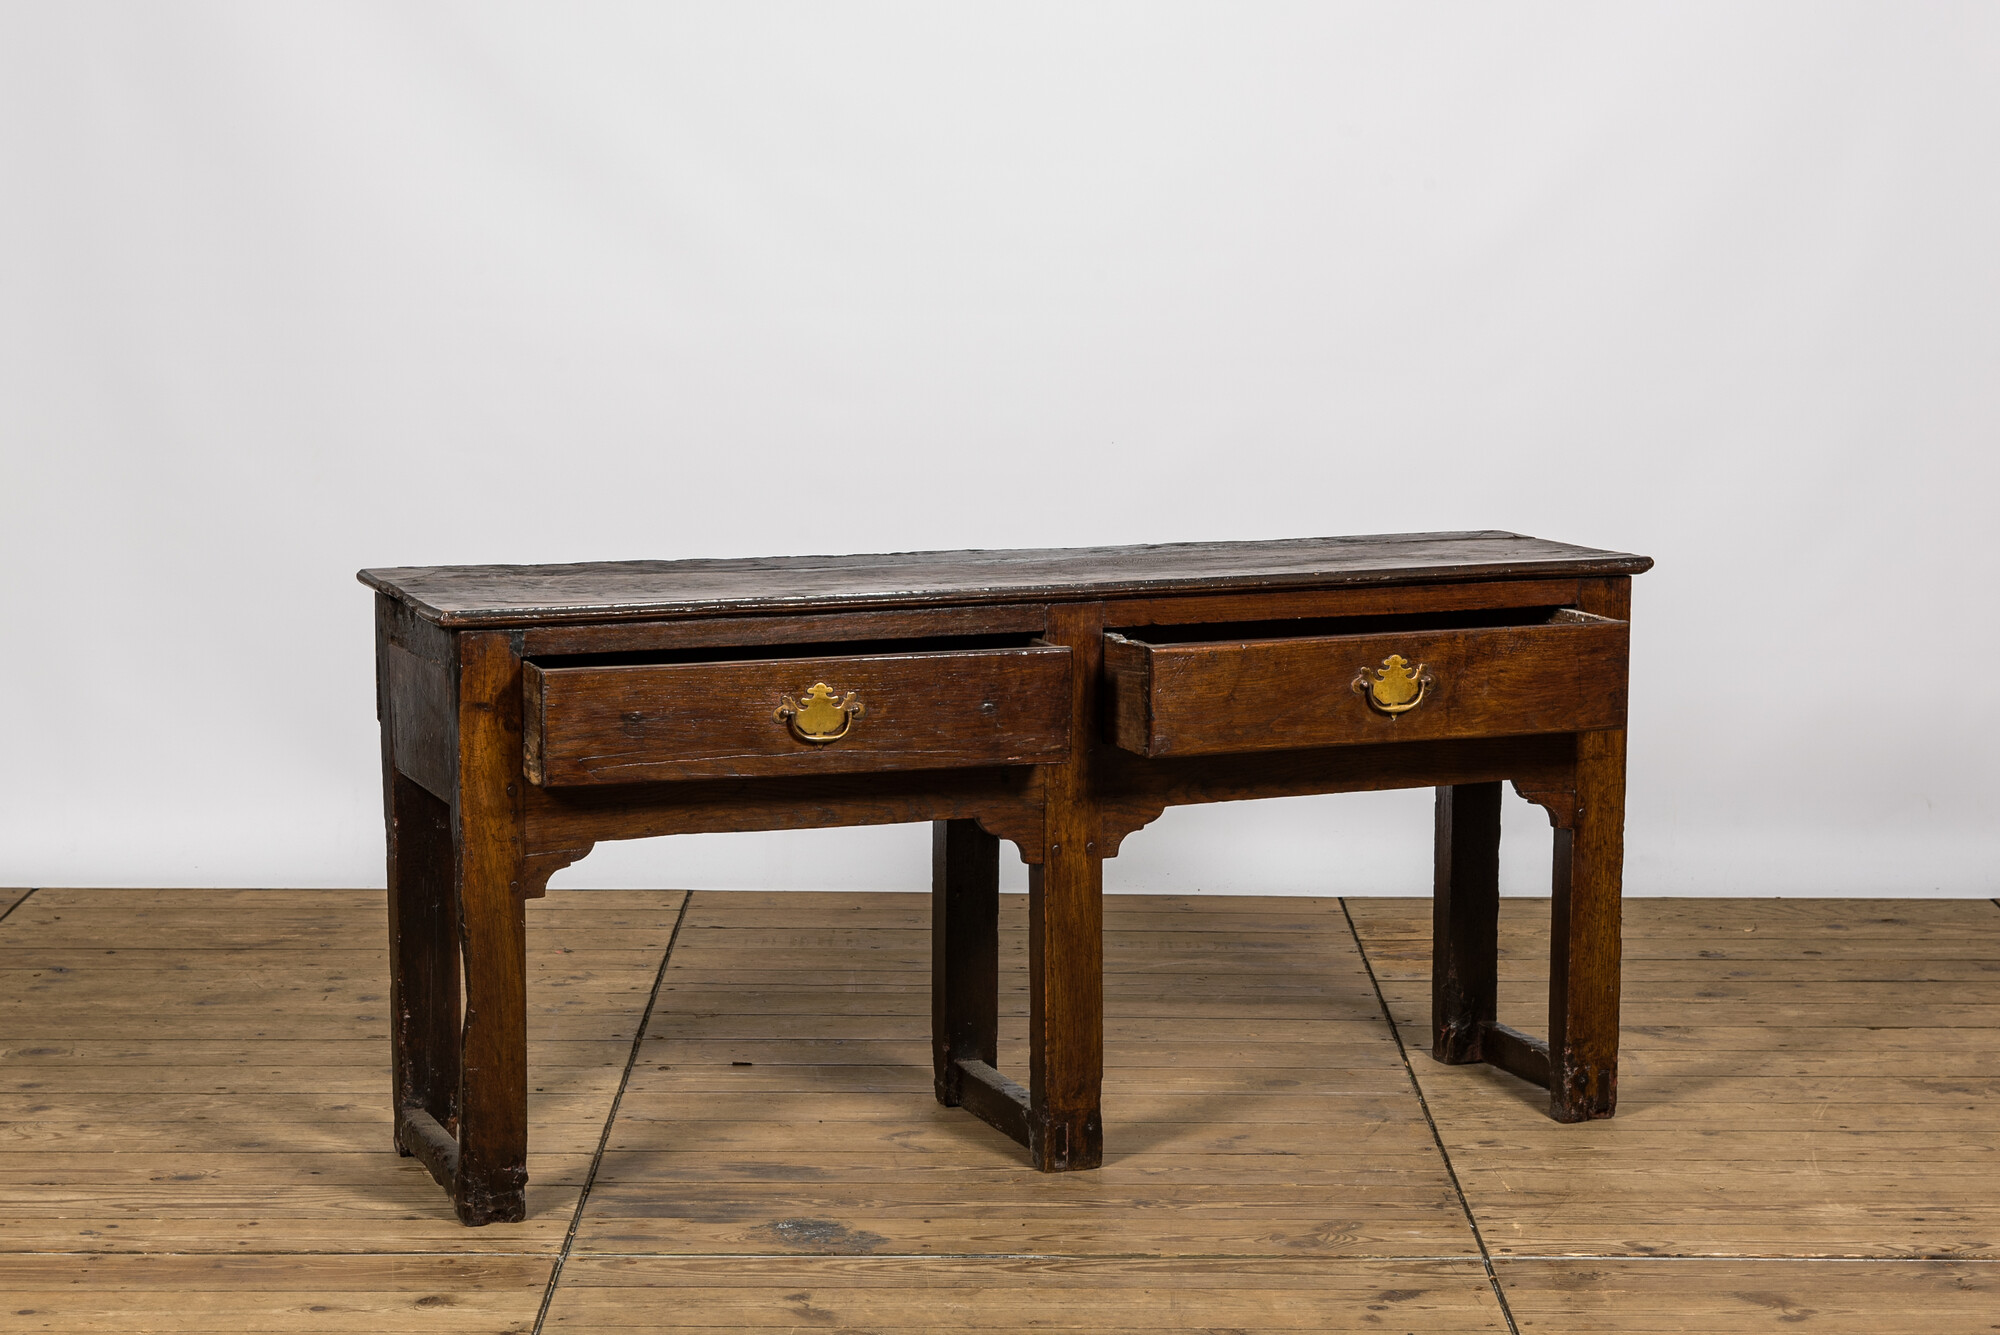 An English oak wooden side table, 18th C. - Image 2 of 3